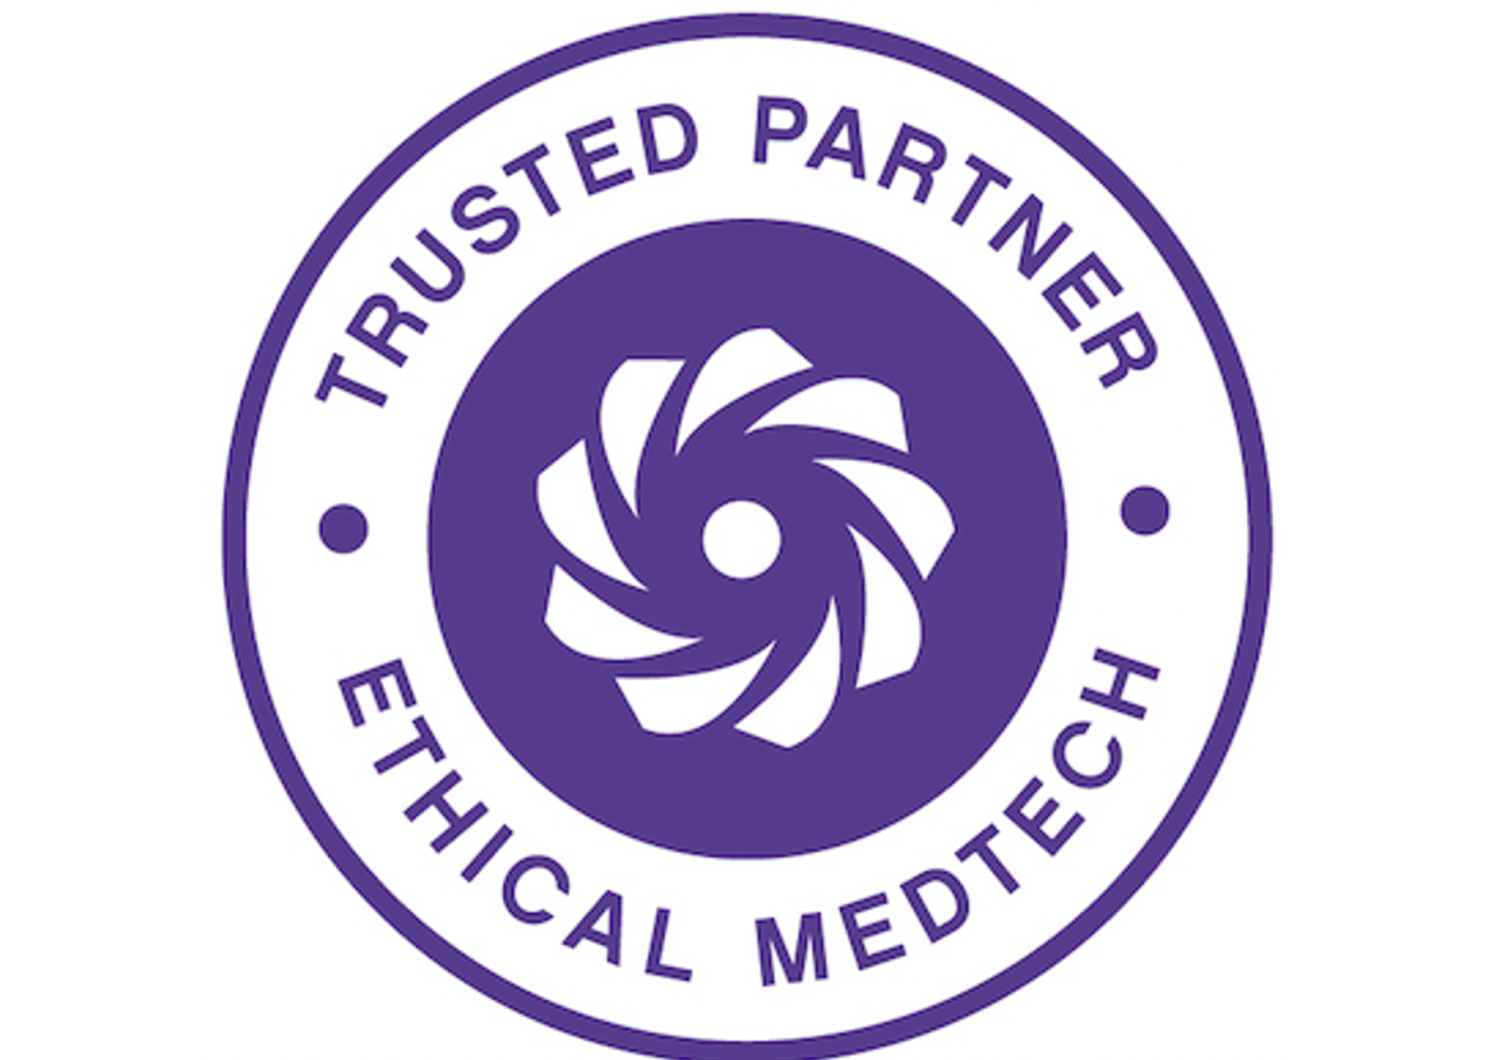 Open Audience awarded trusted partner status by ethical medtech healthcare events medical society clients